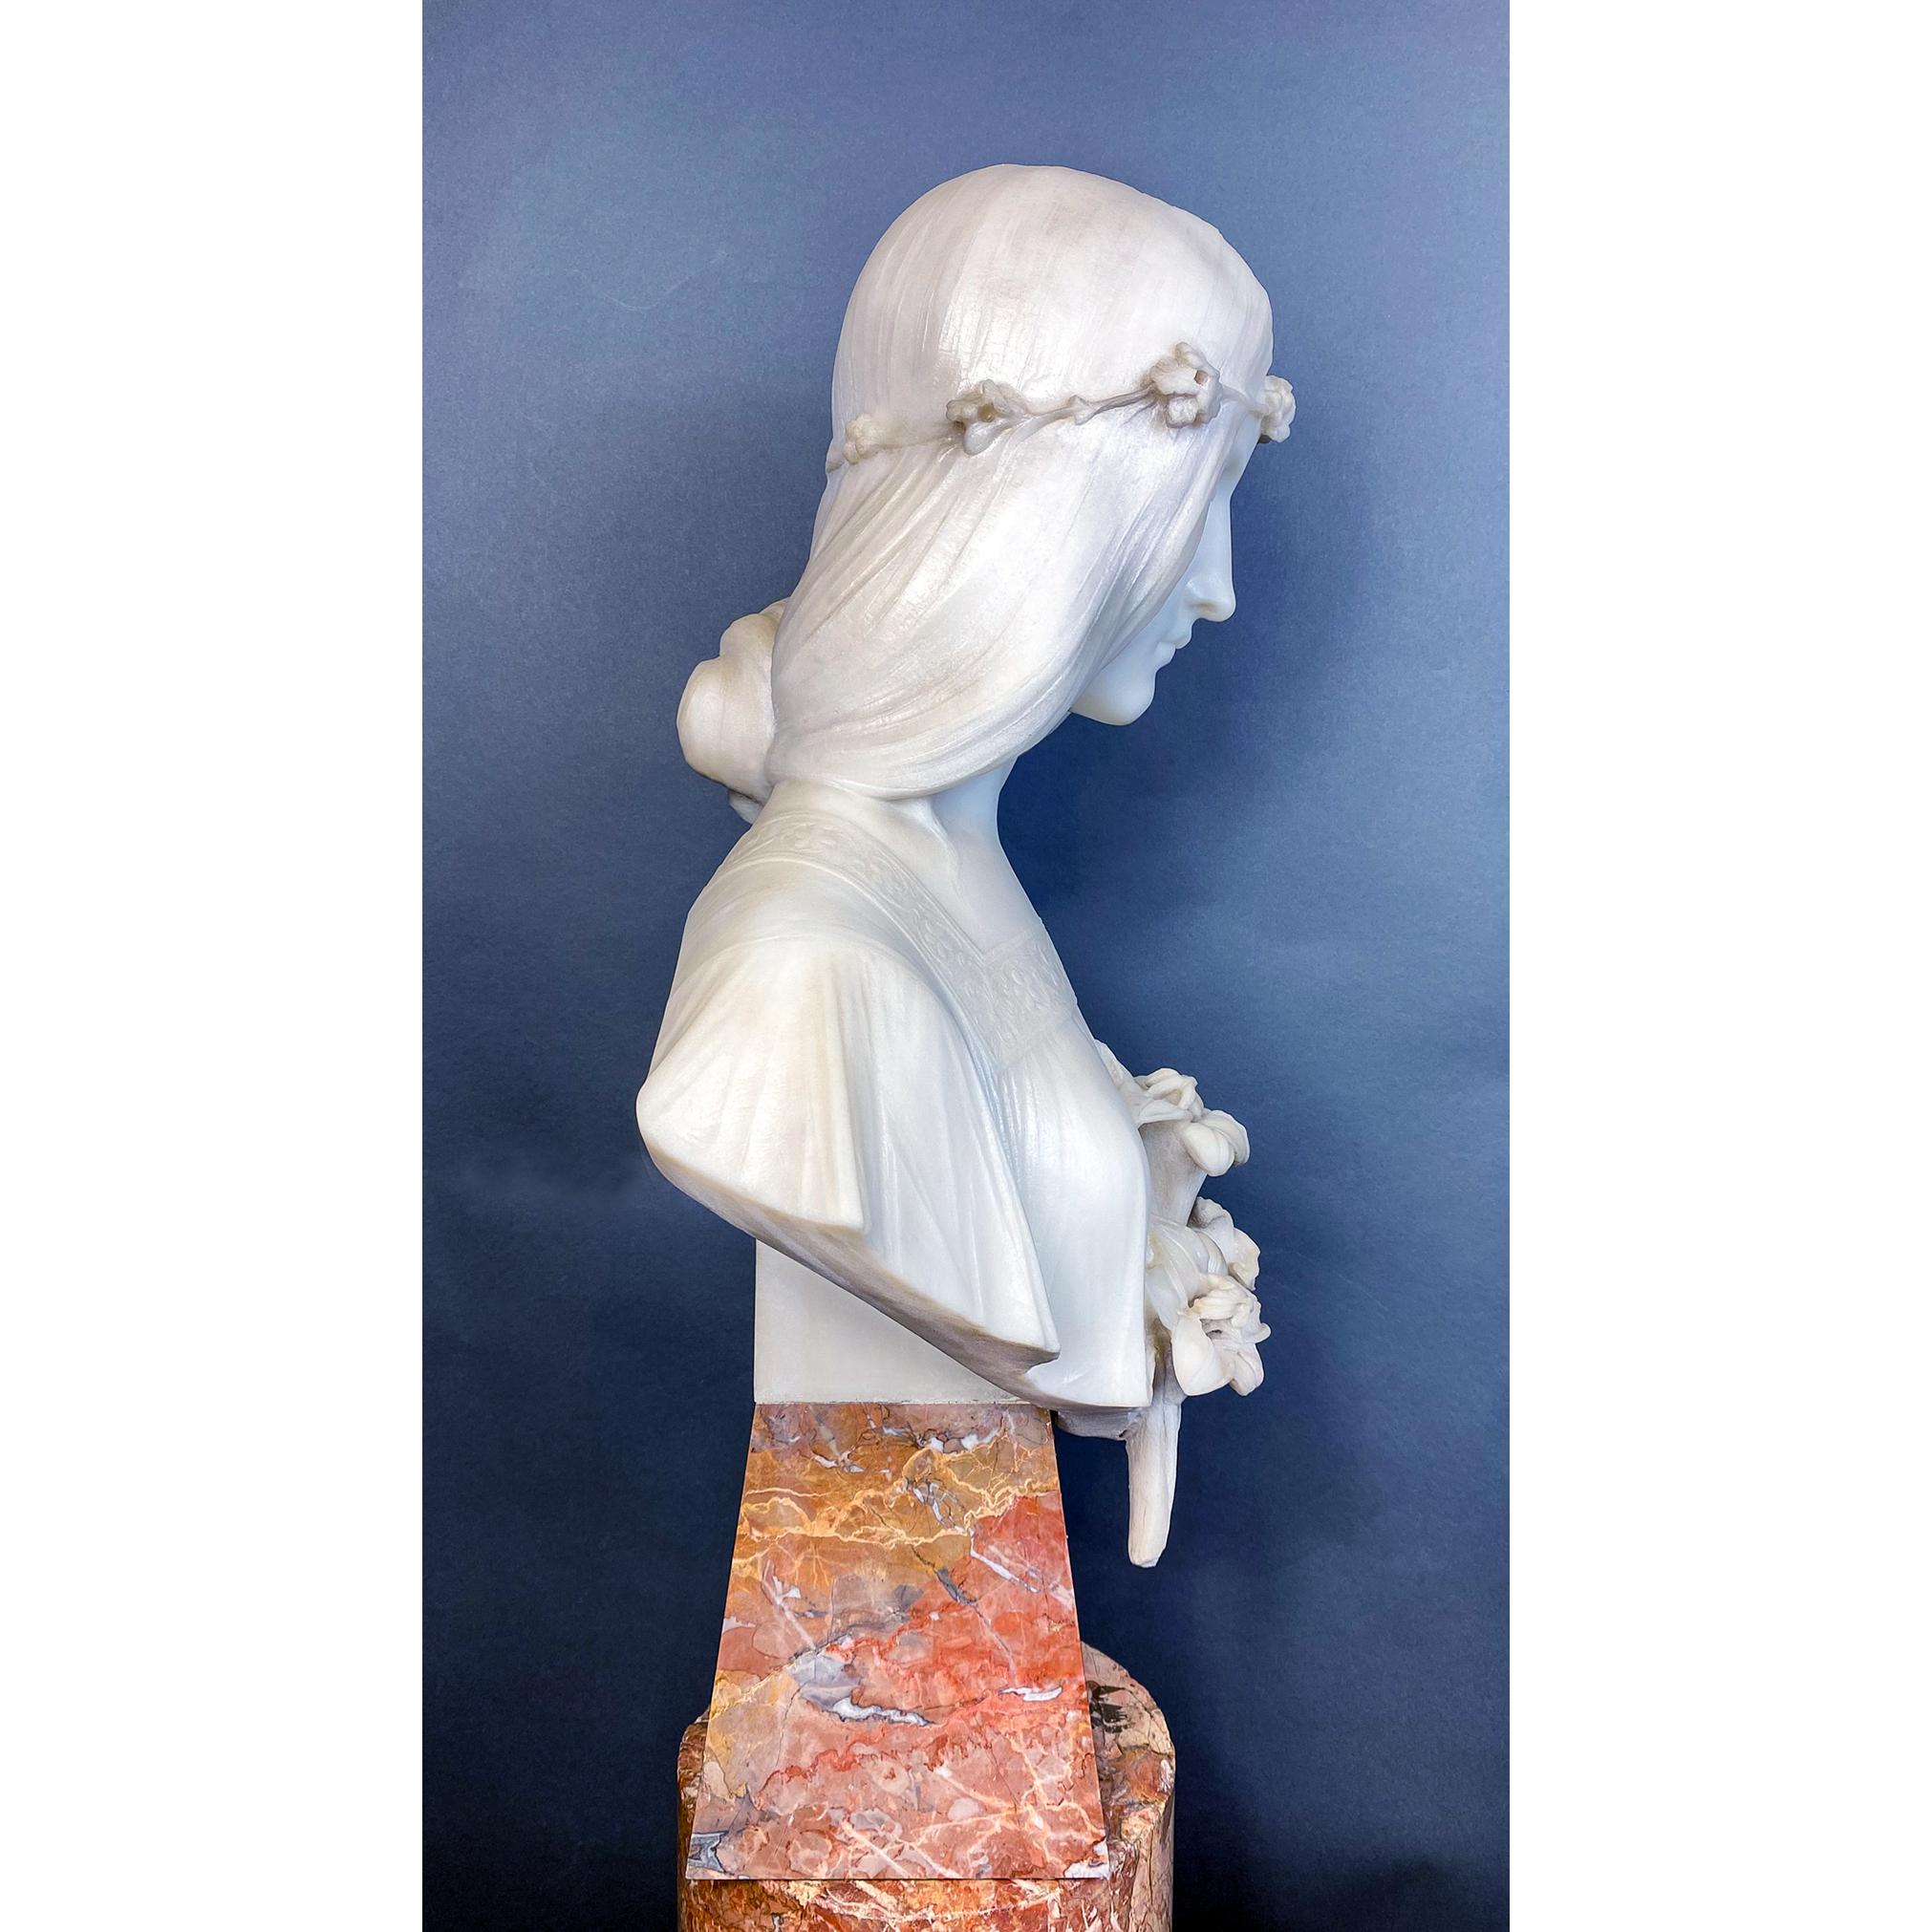 Fine Female White Marble Bust with Lilies  - Gray Figurative Sculpture by Attilio Fagioli